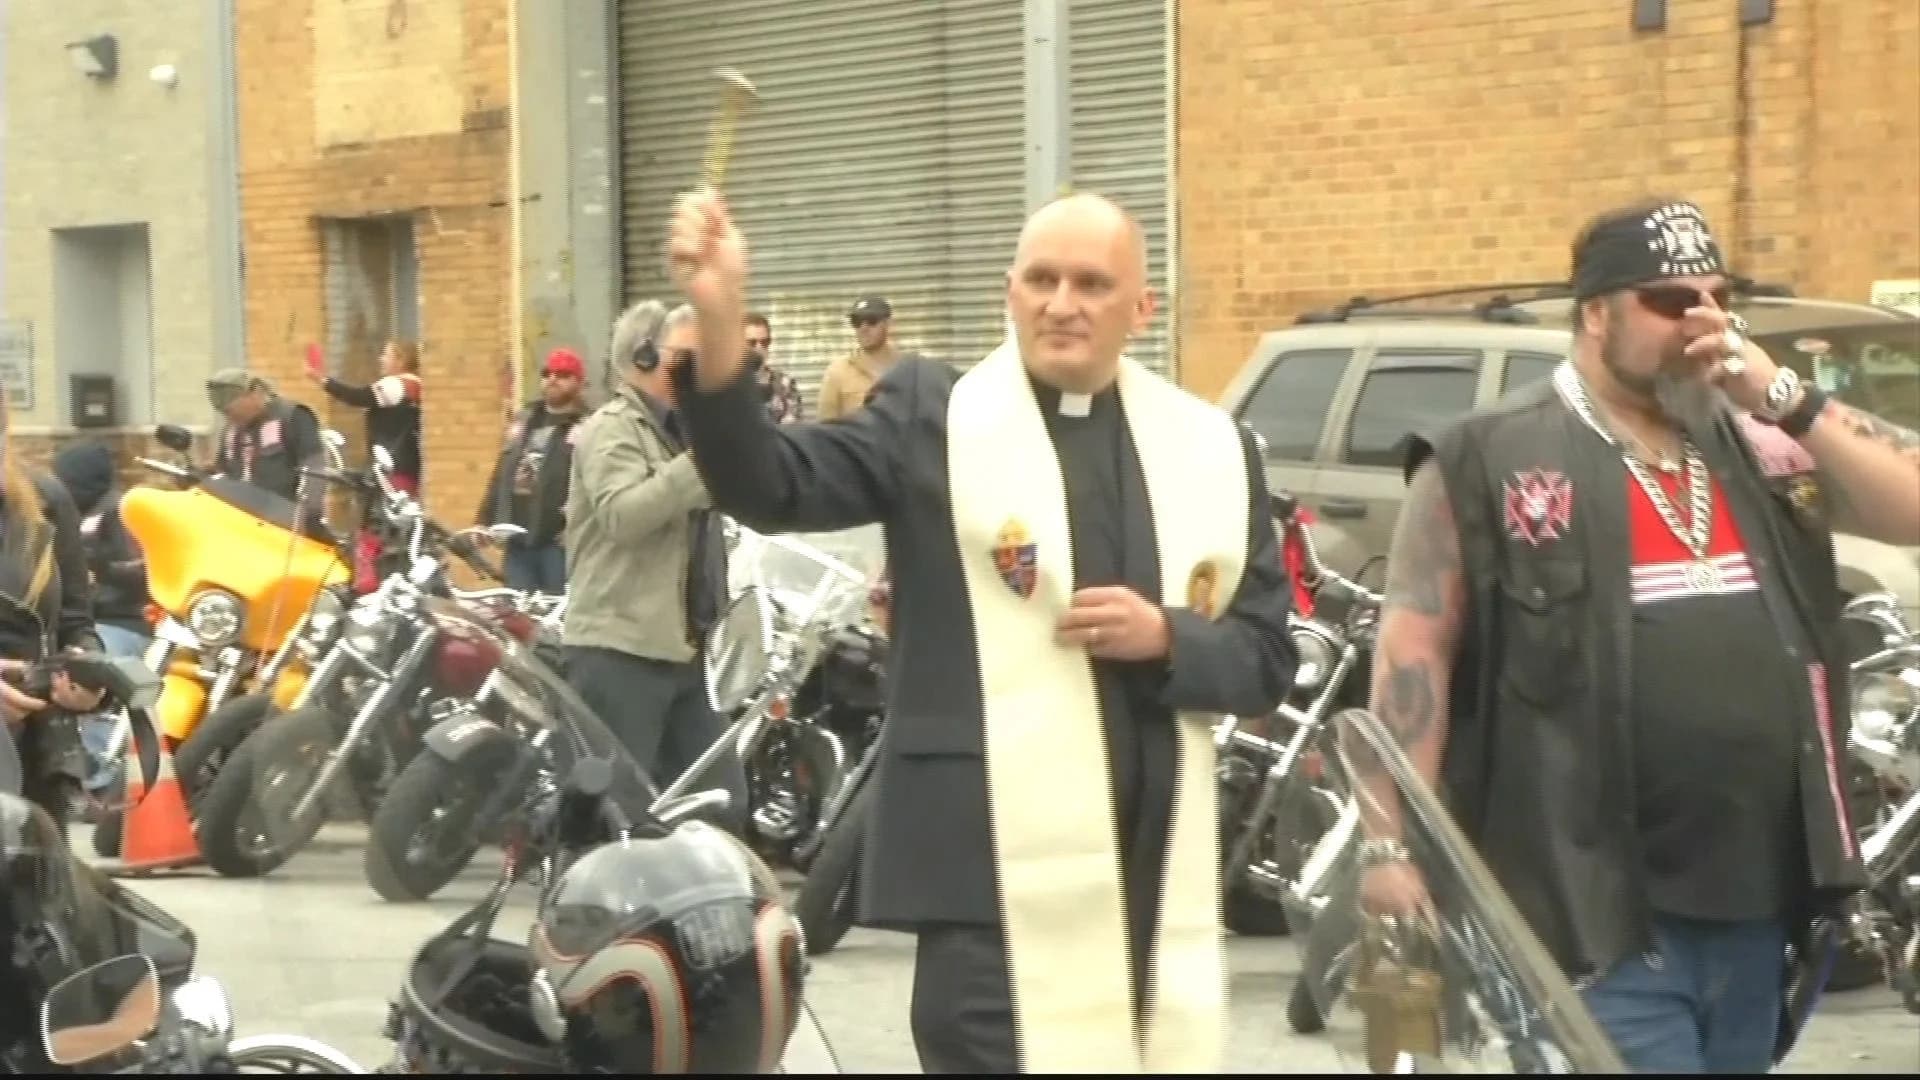 Annual bike blessing held in Greenpoint